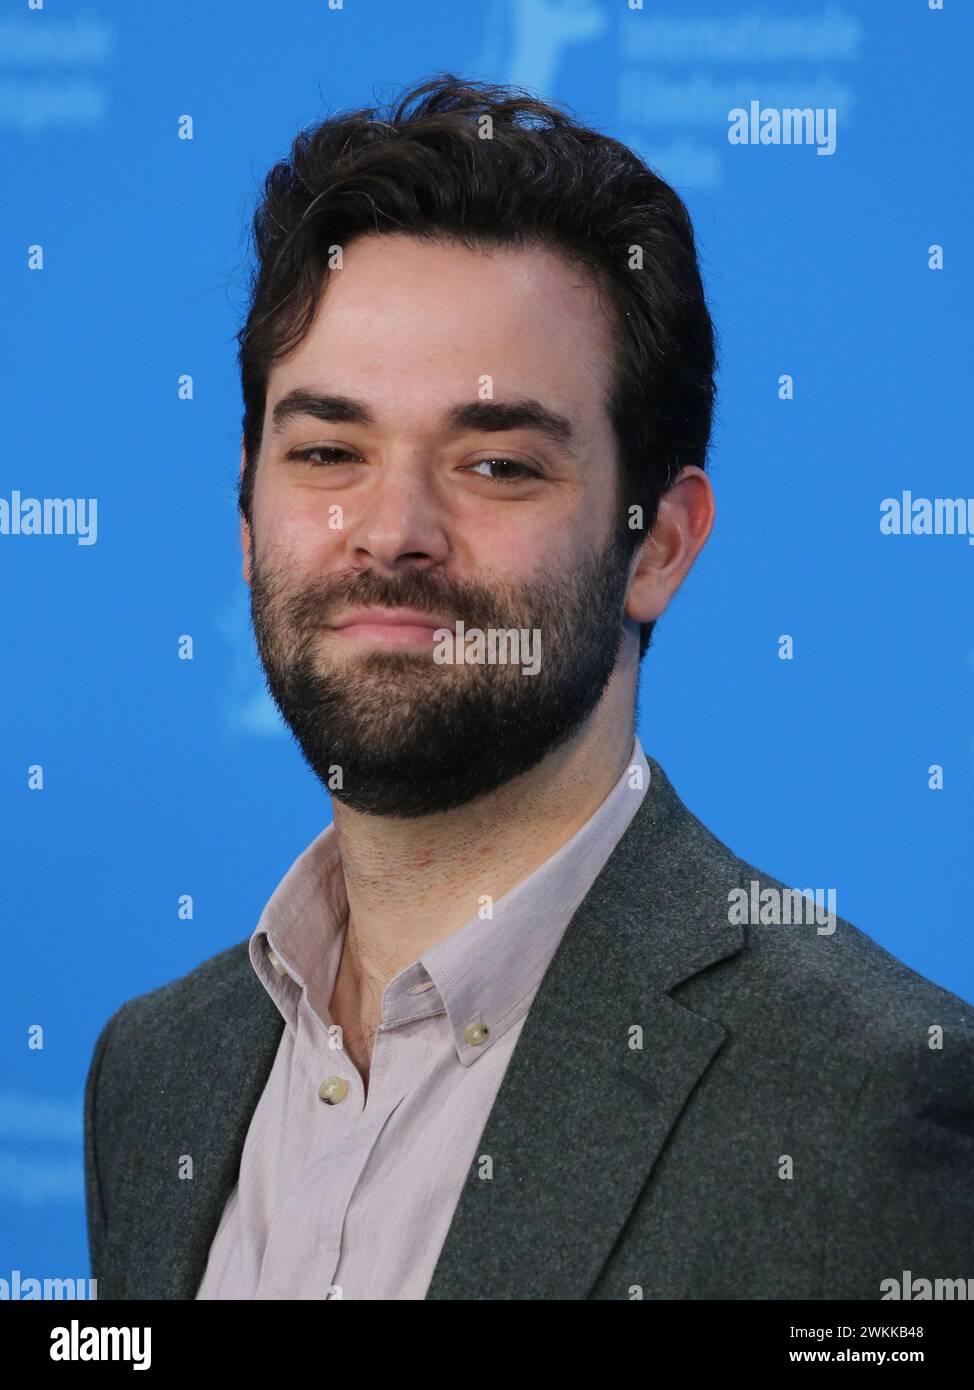 Berlin, Germany, 21st February 2024, Producer Michael Parets at the photo call for the film Spaceman at the 74th Berlinale International Film Festival. Photo Credit: Doreen Kennedy / Alamy Live News. Stock Photo